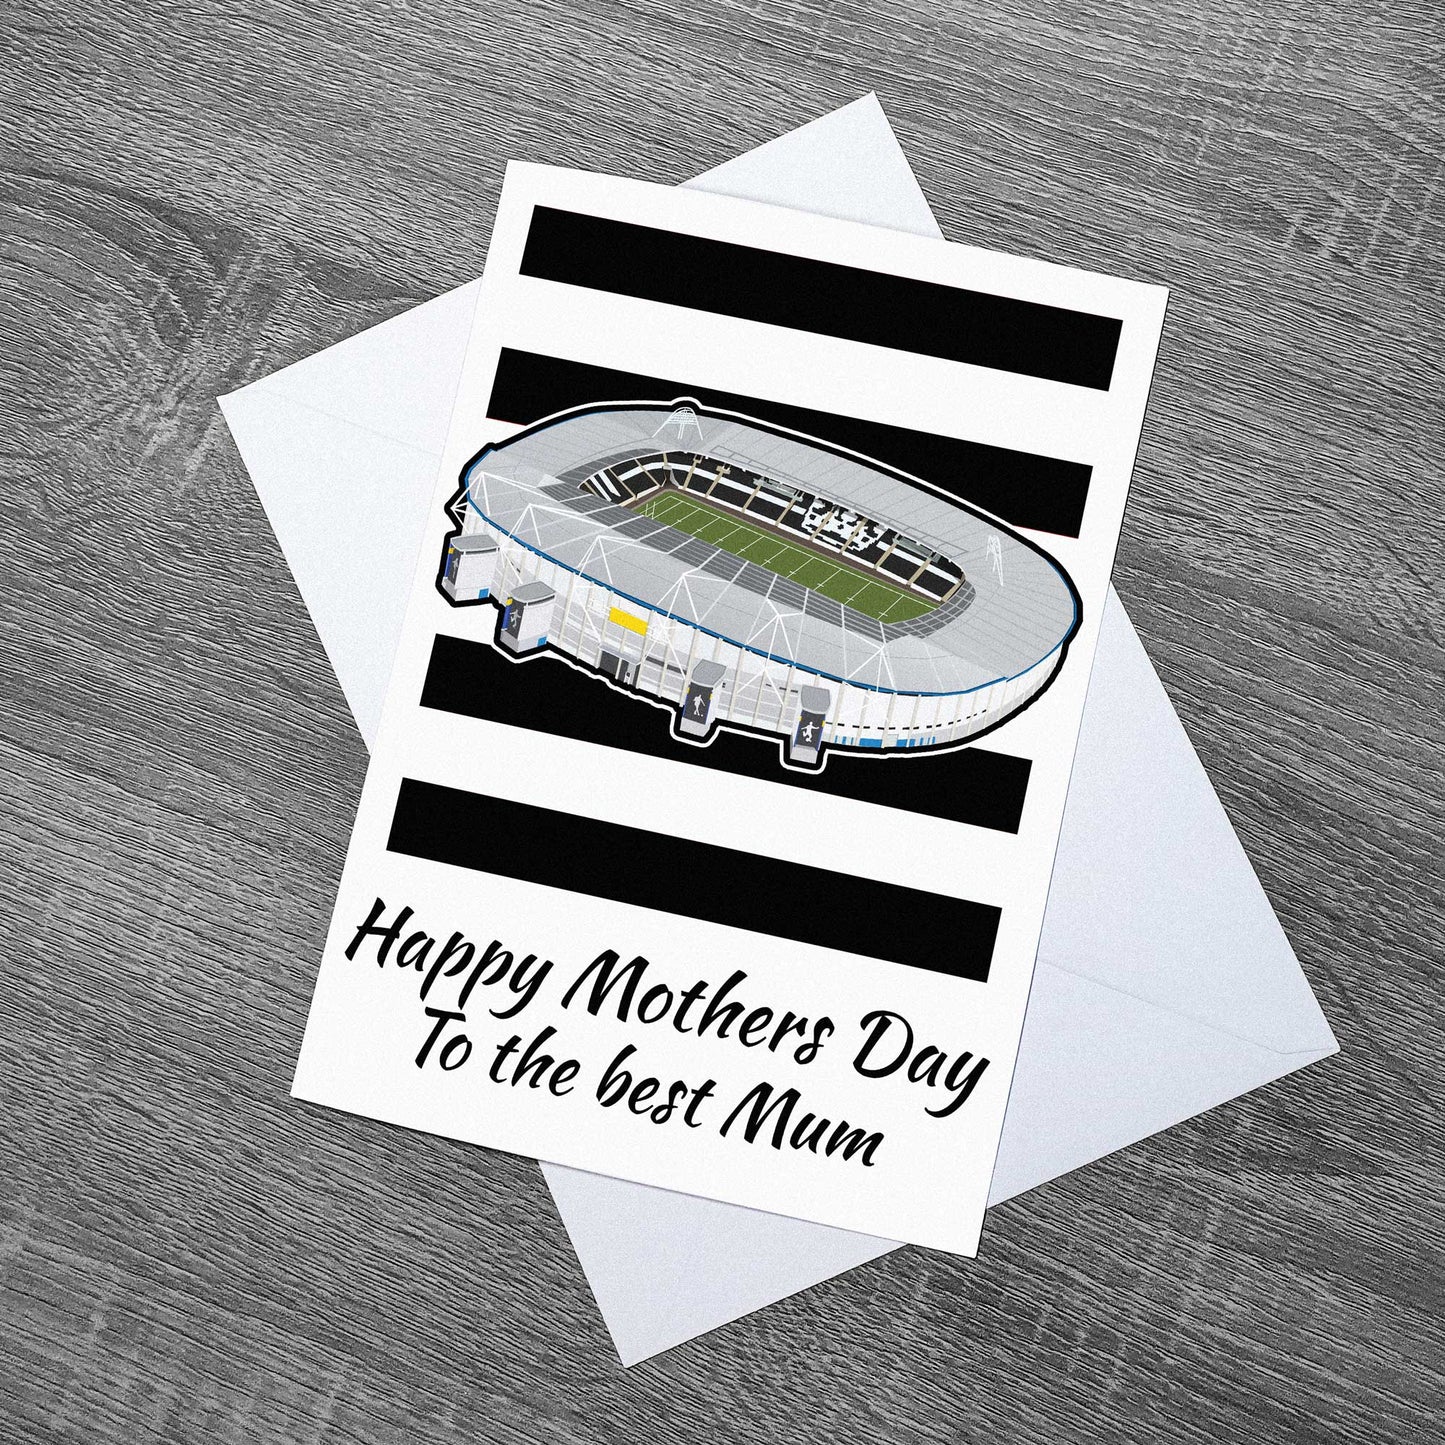 Inspired by the home of Hull FC in East Yorkshire, this is a mothers day card with artwork of the MKM Stadium on it!